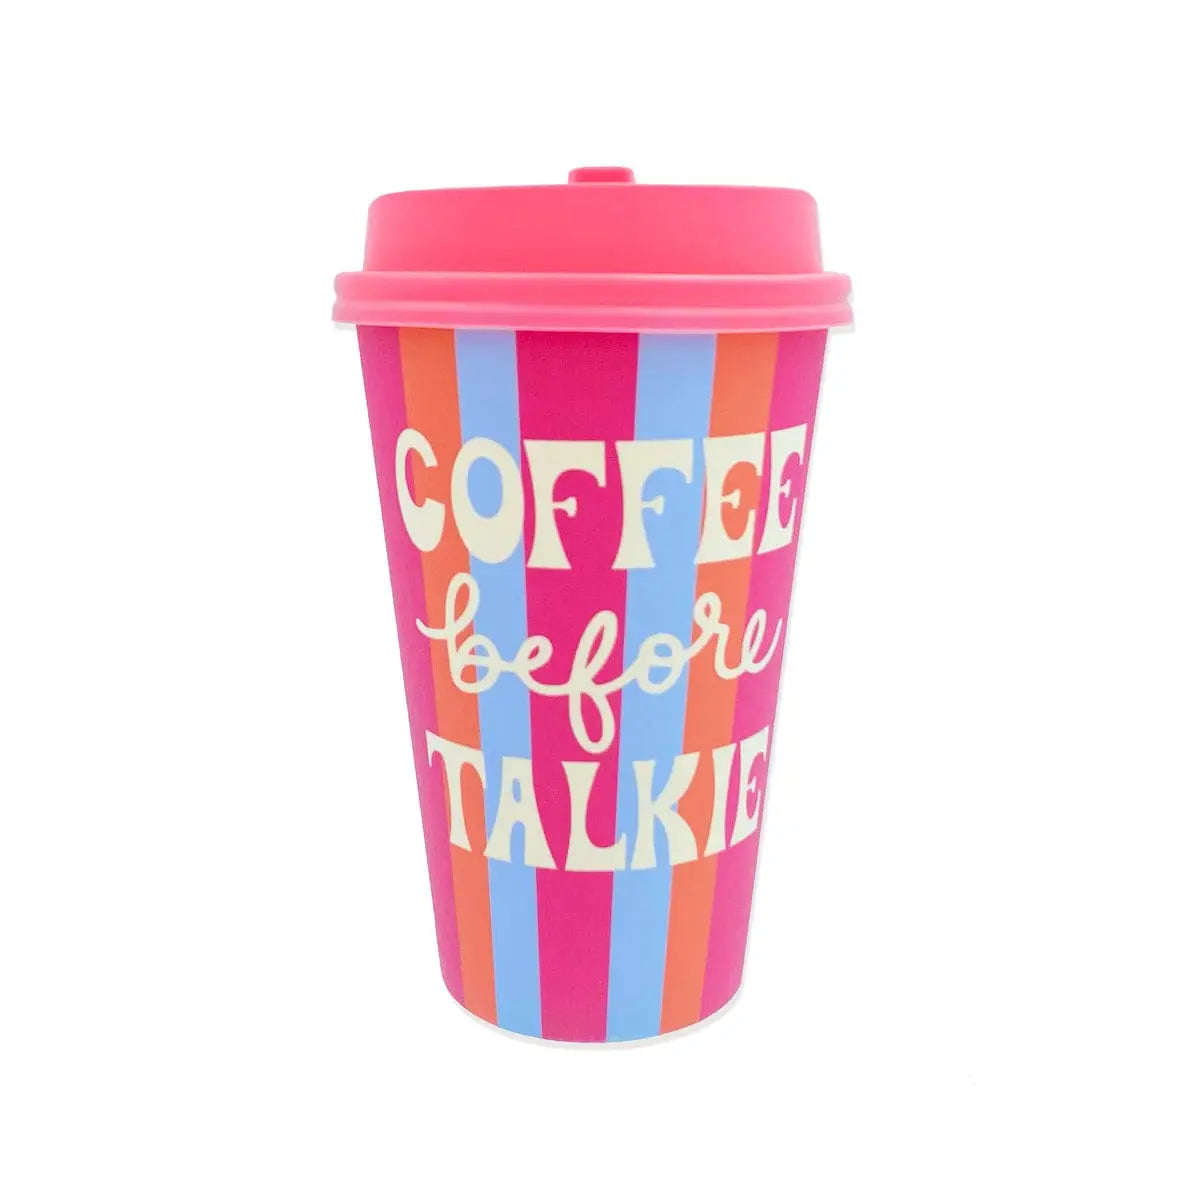 "COFFEE BEFORE TALKIE" TO GO CUP SET